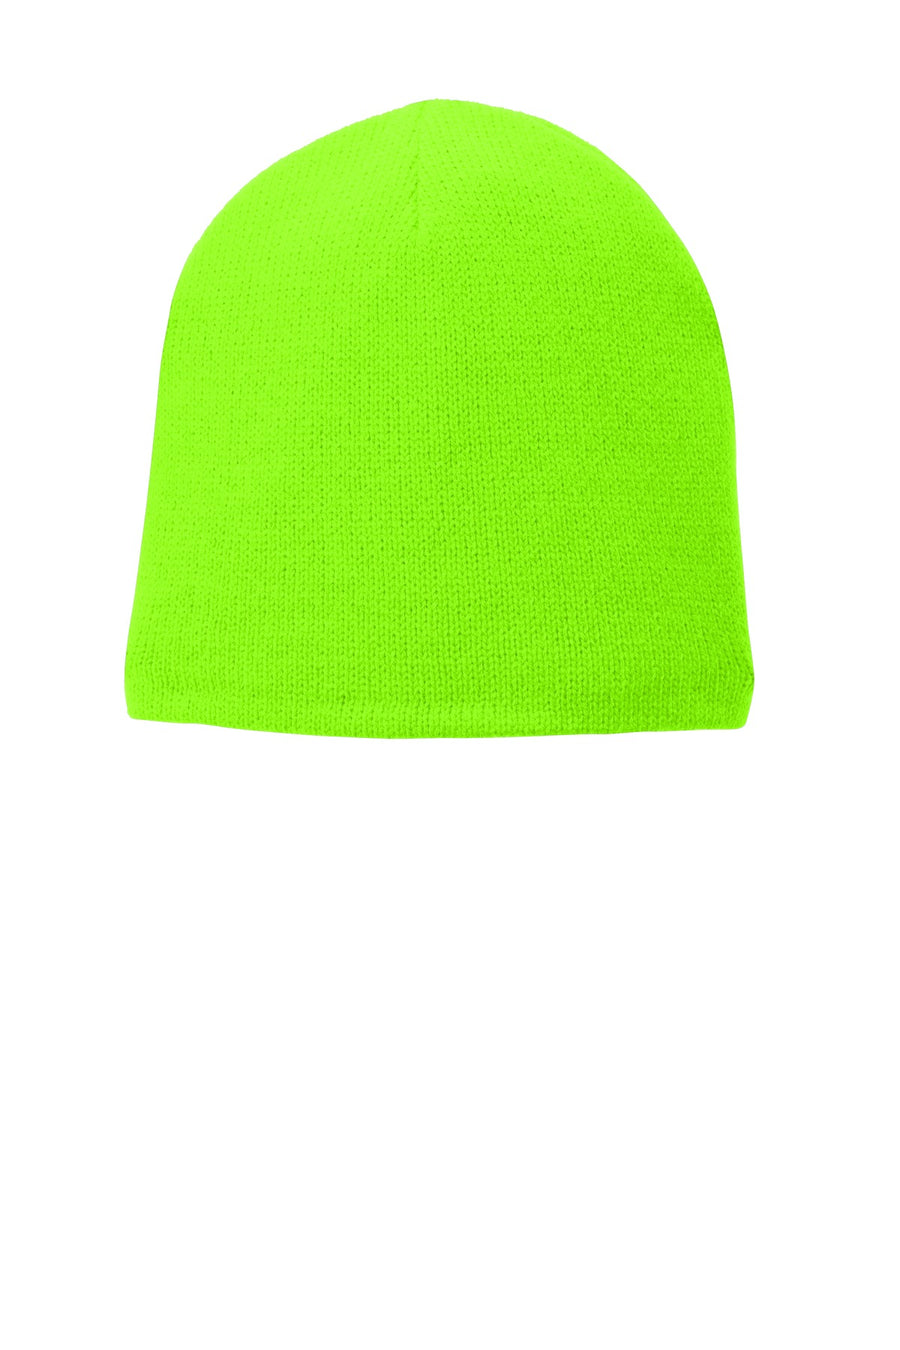 CP91L-Neon Green-front_model